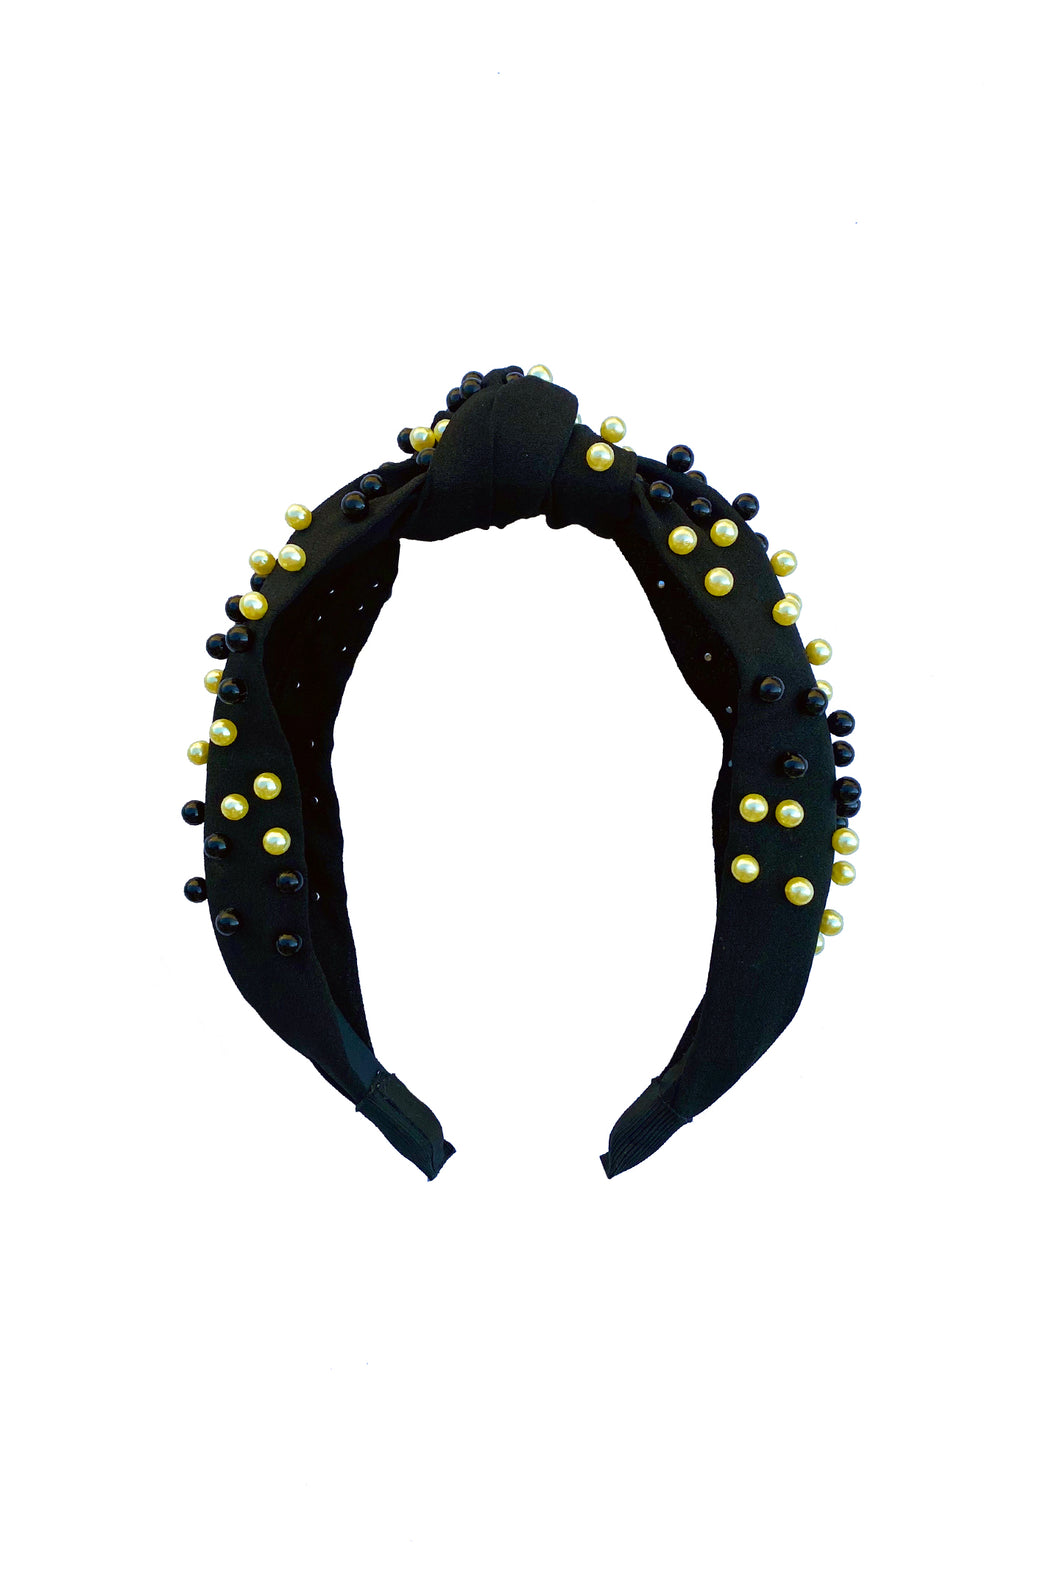 Pearl Headband - Black with Black and Gold Beads